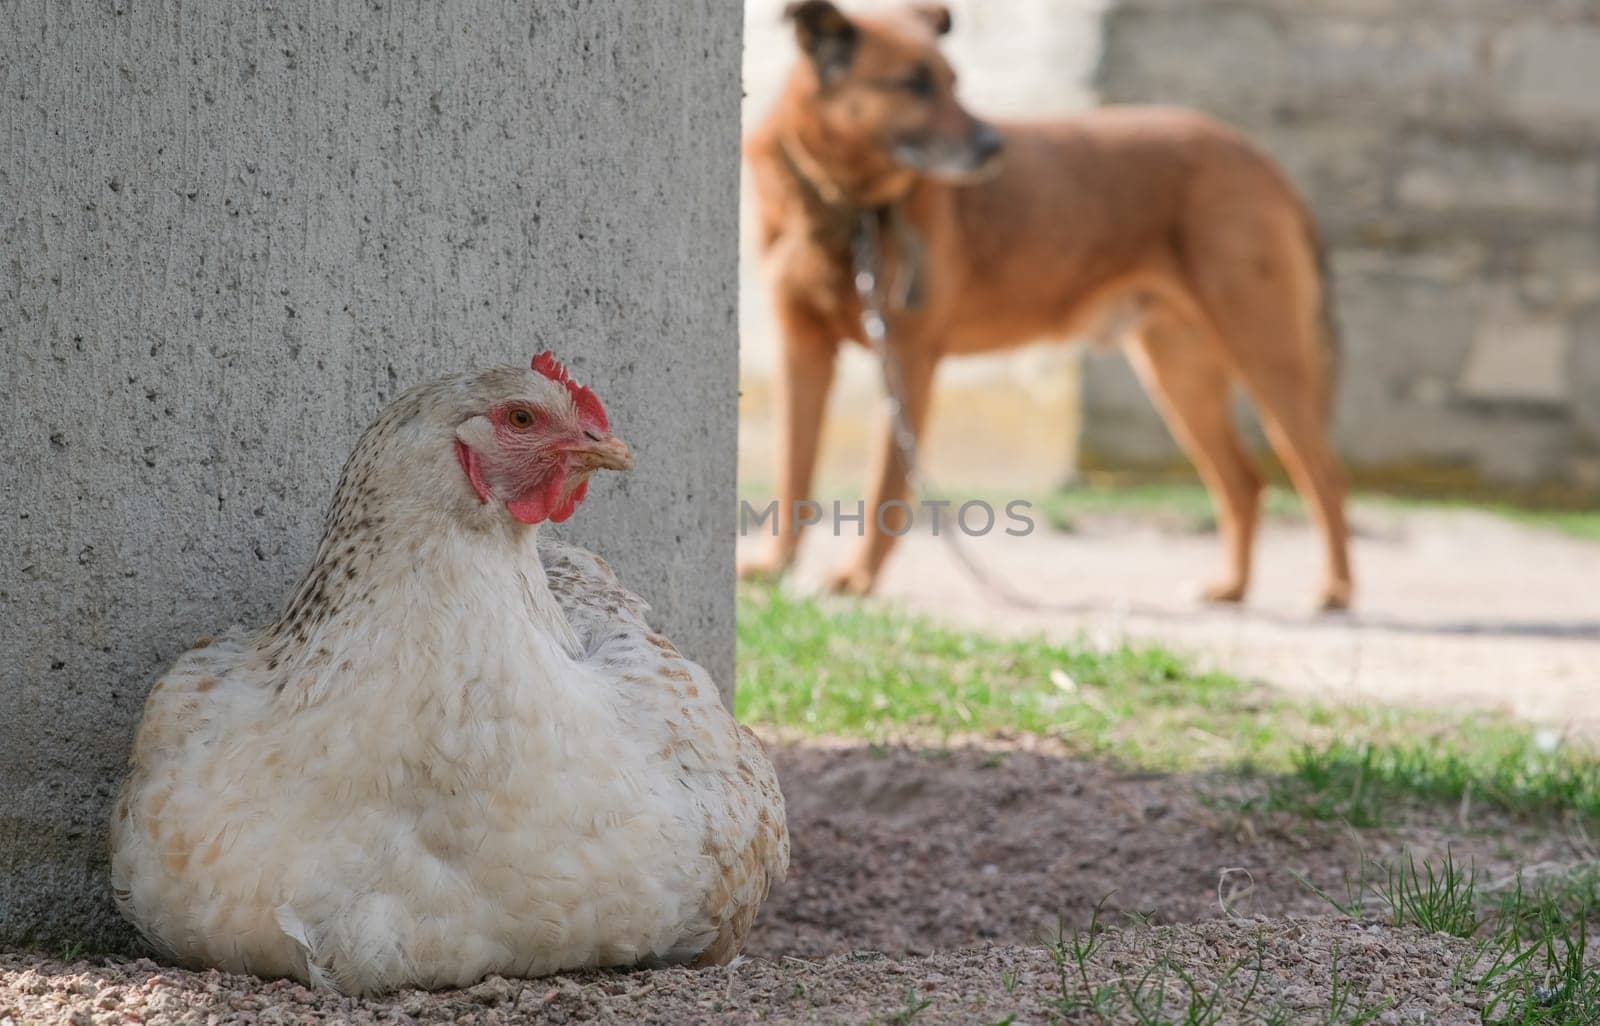 A white chicken bathes in the sand, in the background a red dog. Chicken and dog in one photo.